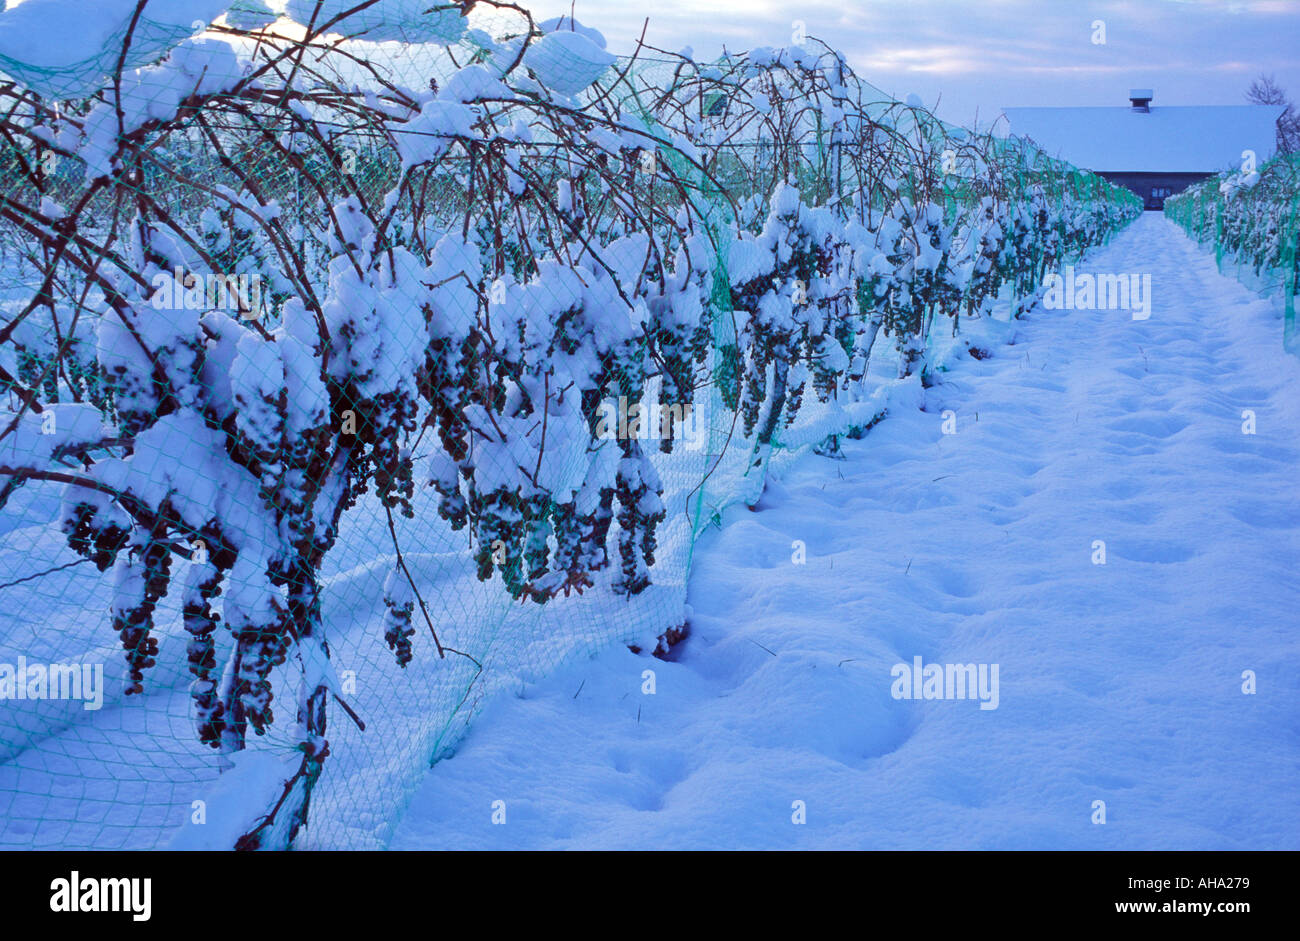 Canada Ontario Niagara on the Lake Vidal grapes left on the vine in winter for the production of ice wine Stock Photo